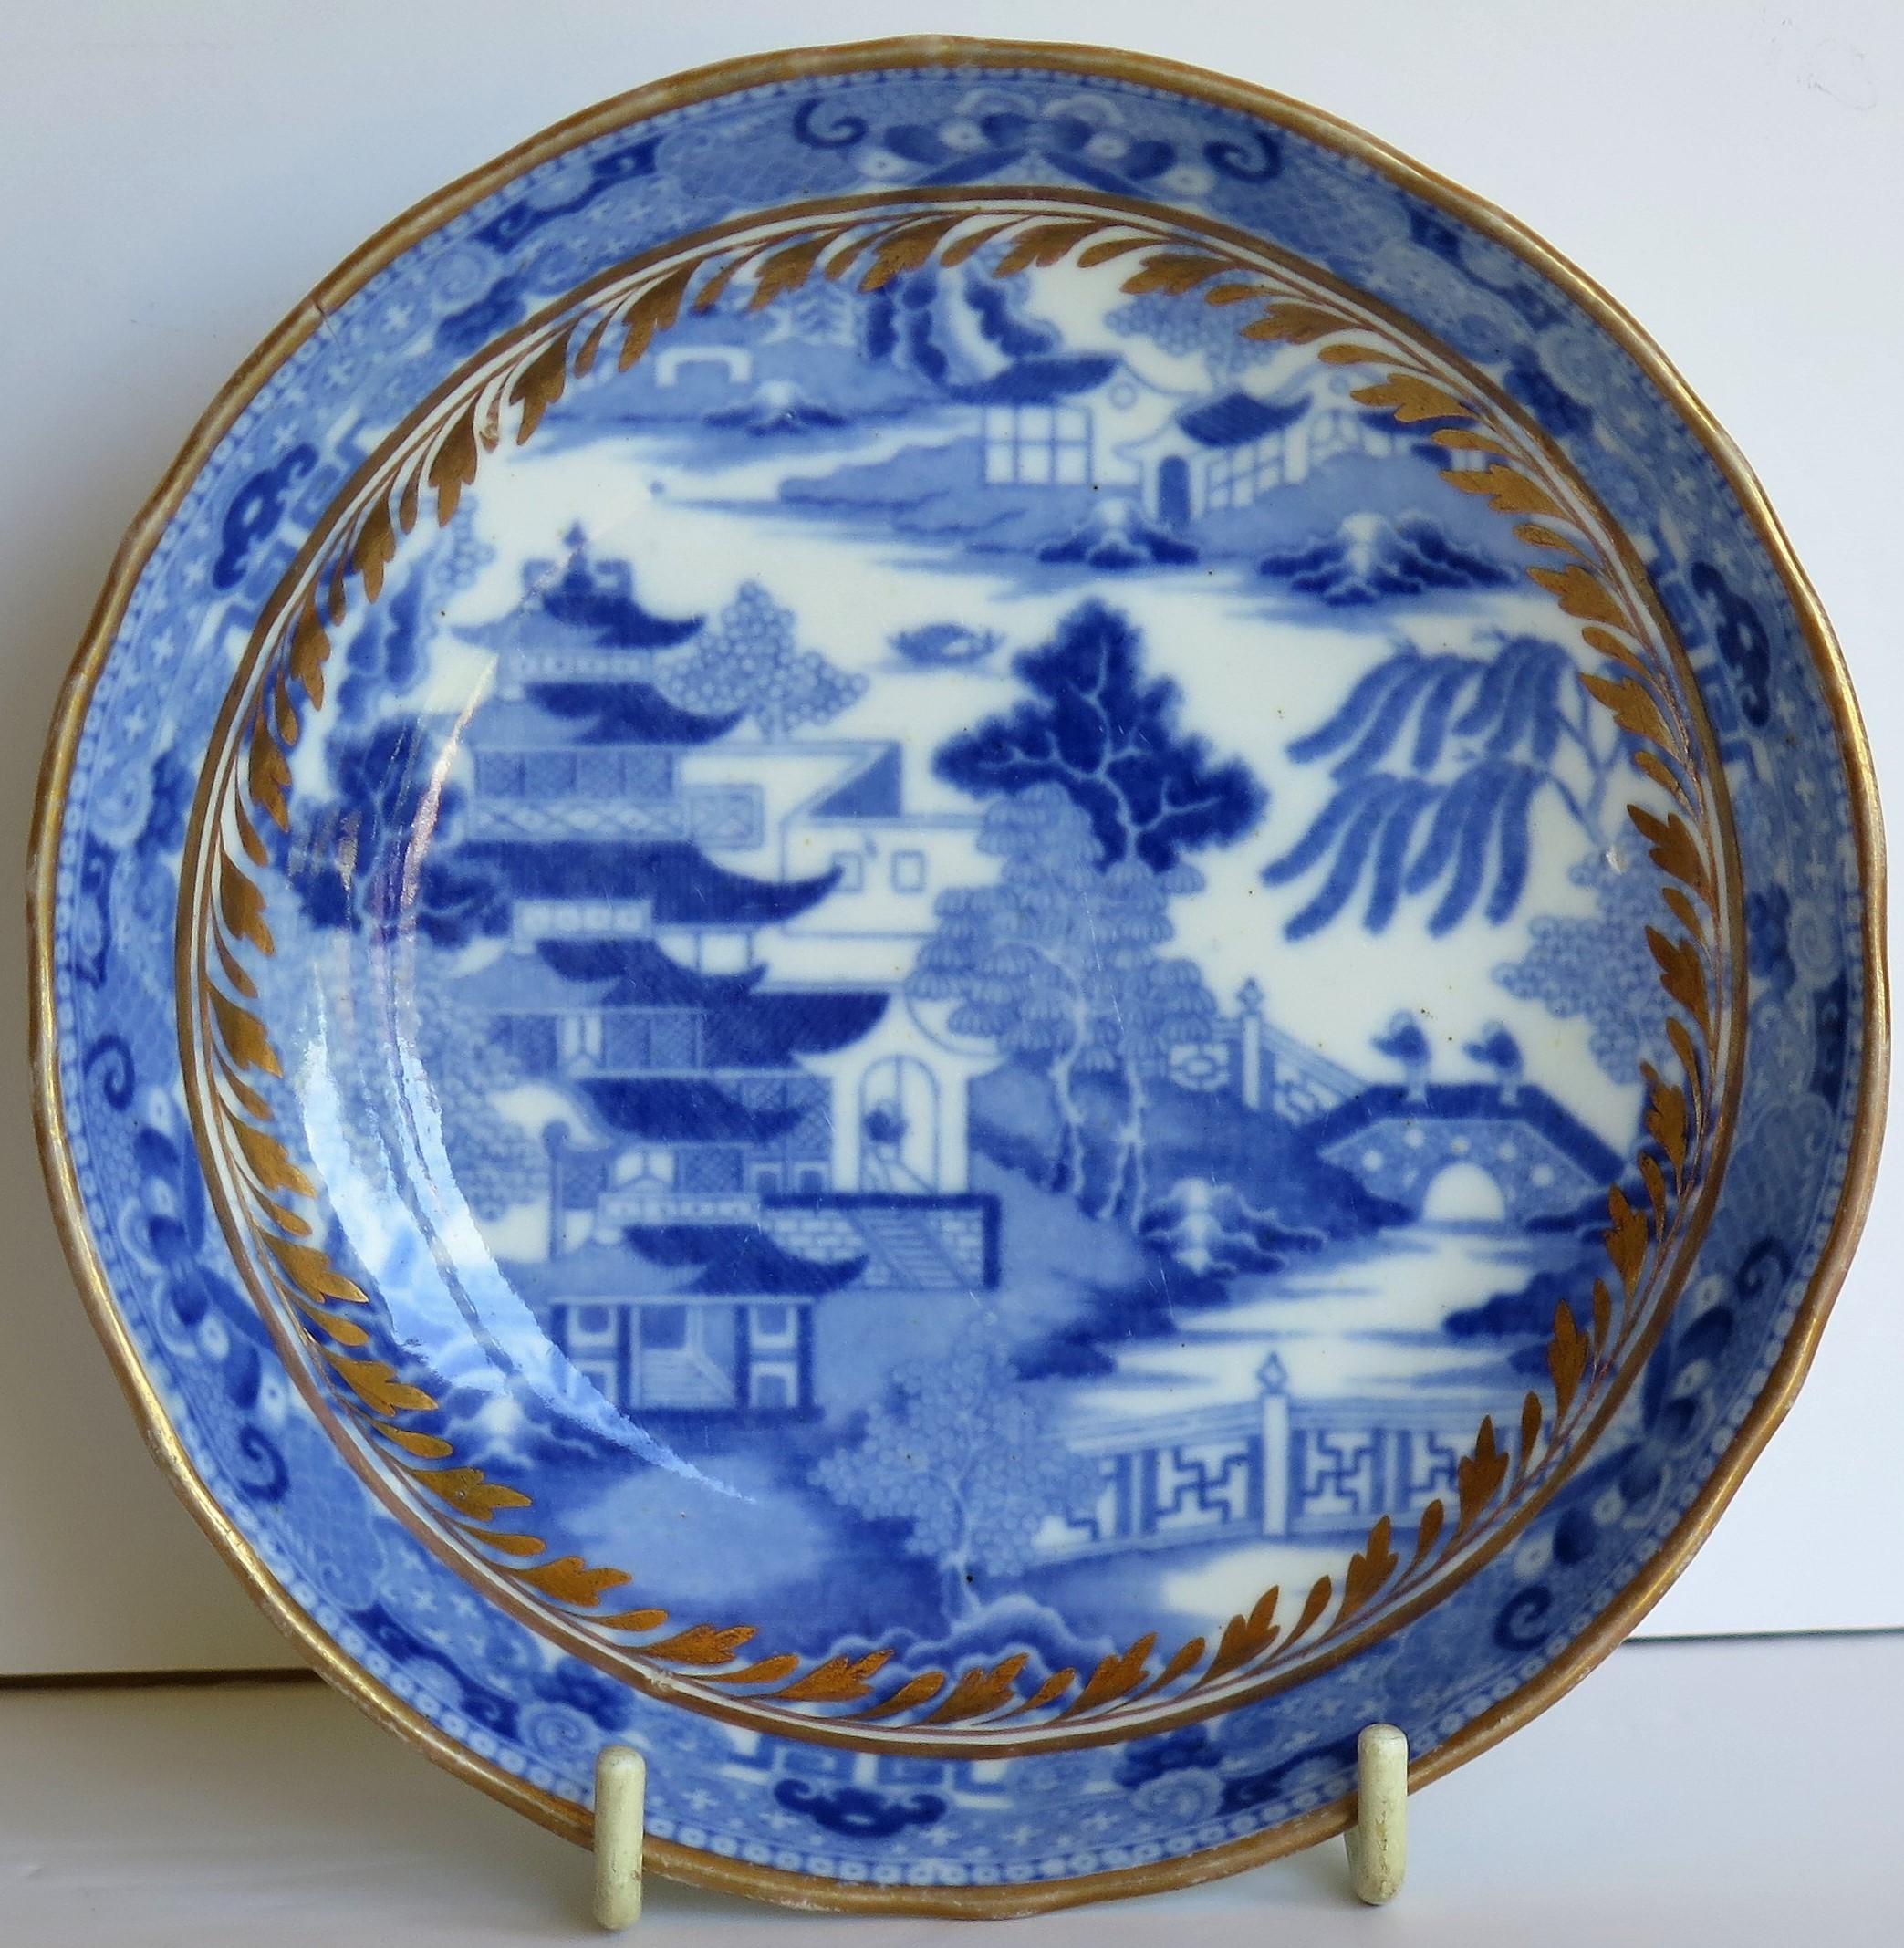 Chinoiserie Miles Mason Porcelain Saucer Dish Blue and White Gilded Broseley Pattern Ca 1805